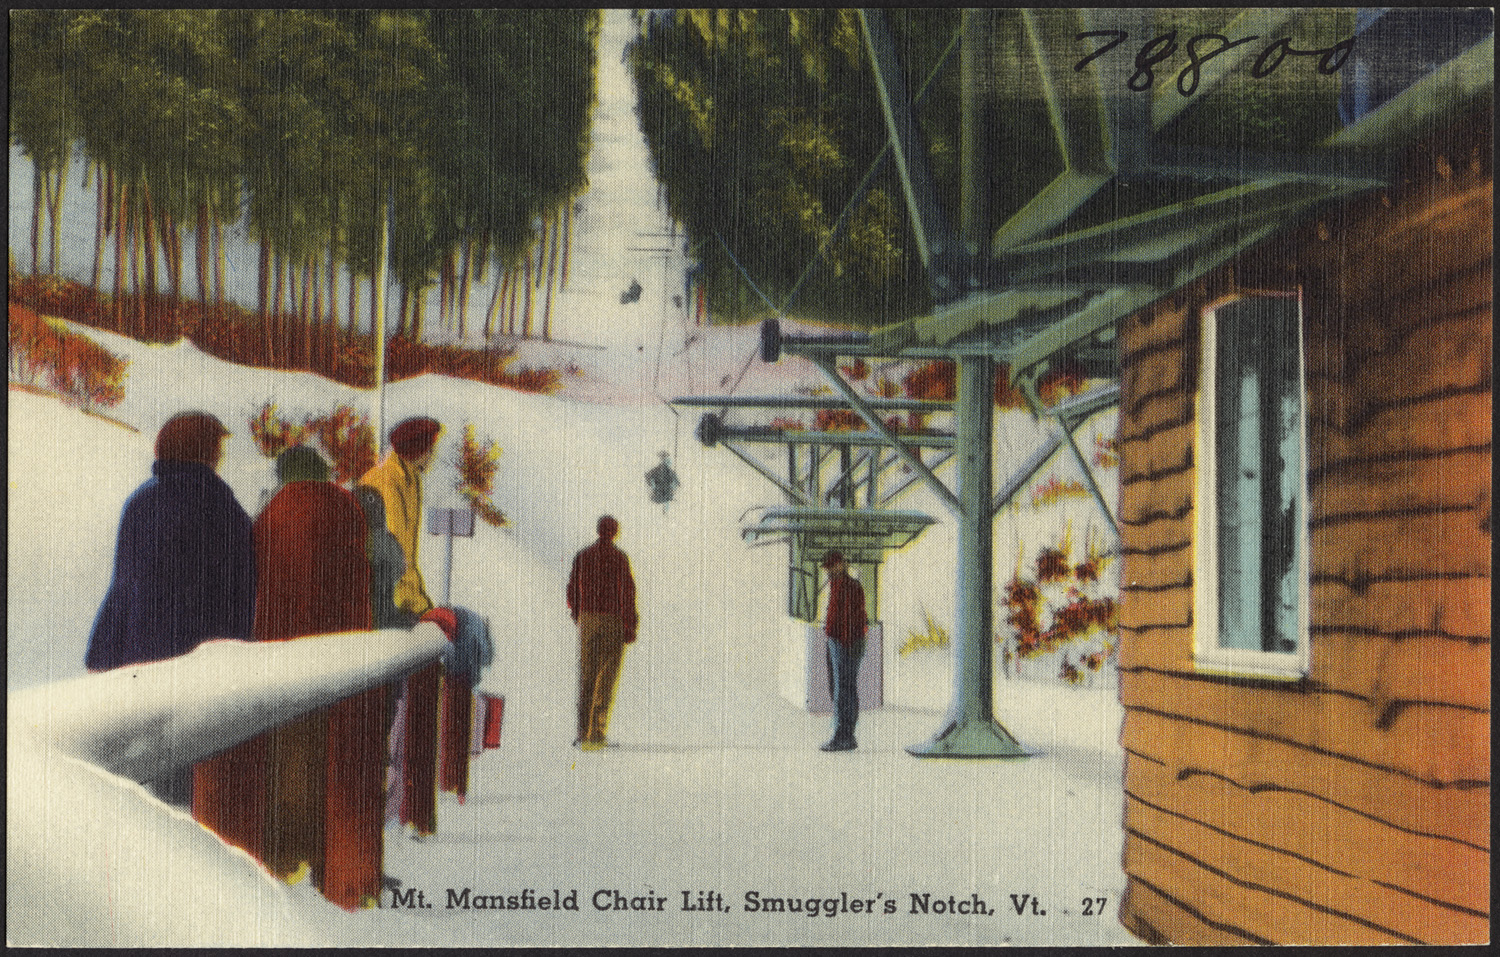 a painting of people on skis in the snow at a ski lift